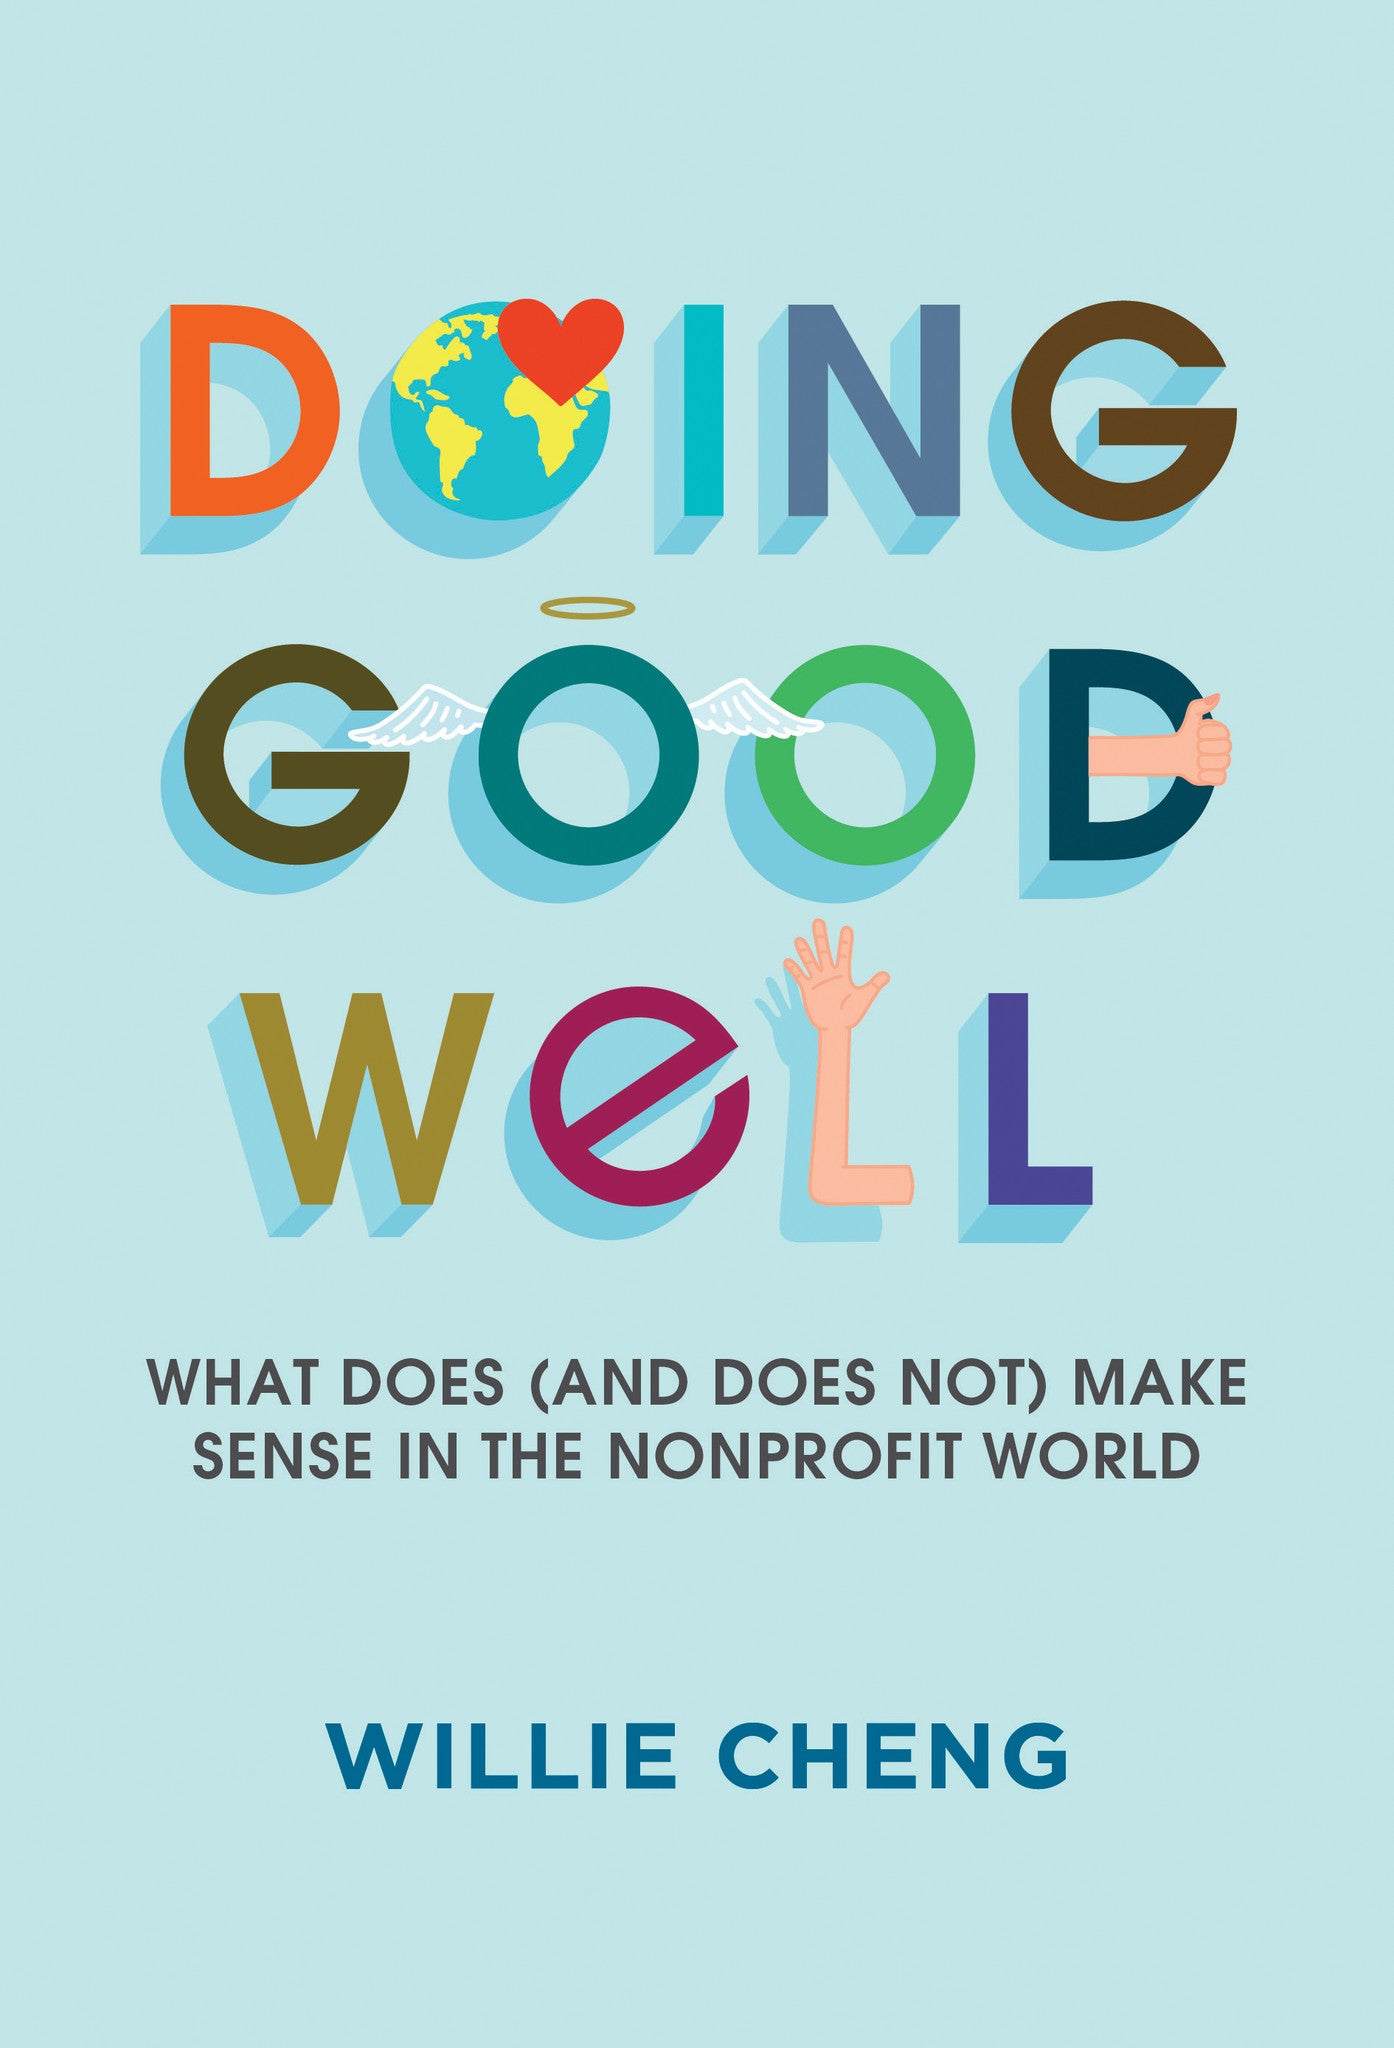 Doing Good Well: What Does (And Does Not) Make Sense in the Nonprofit World